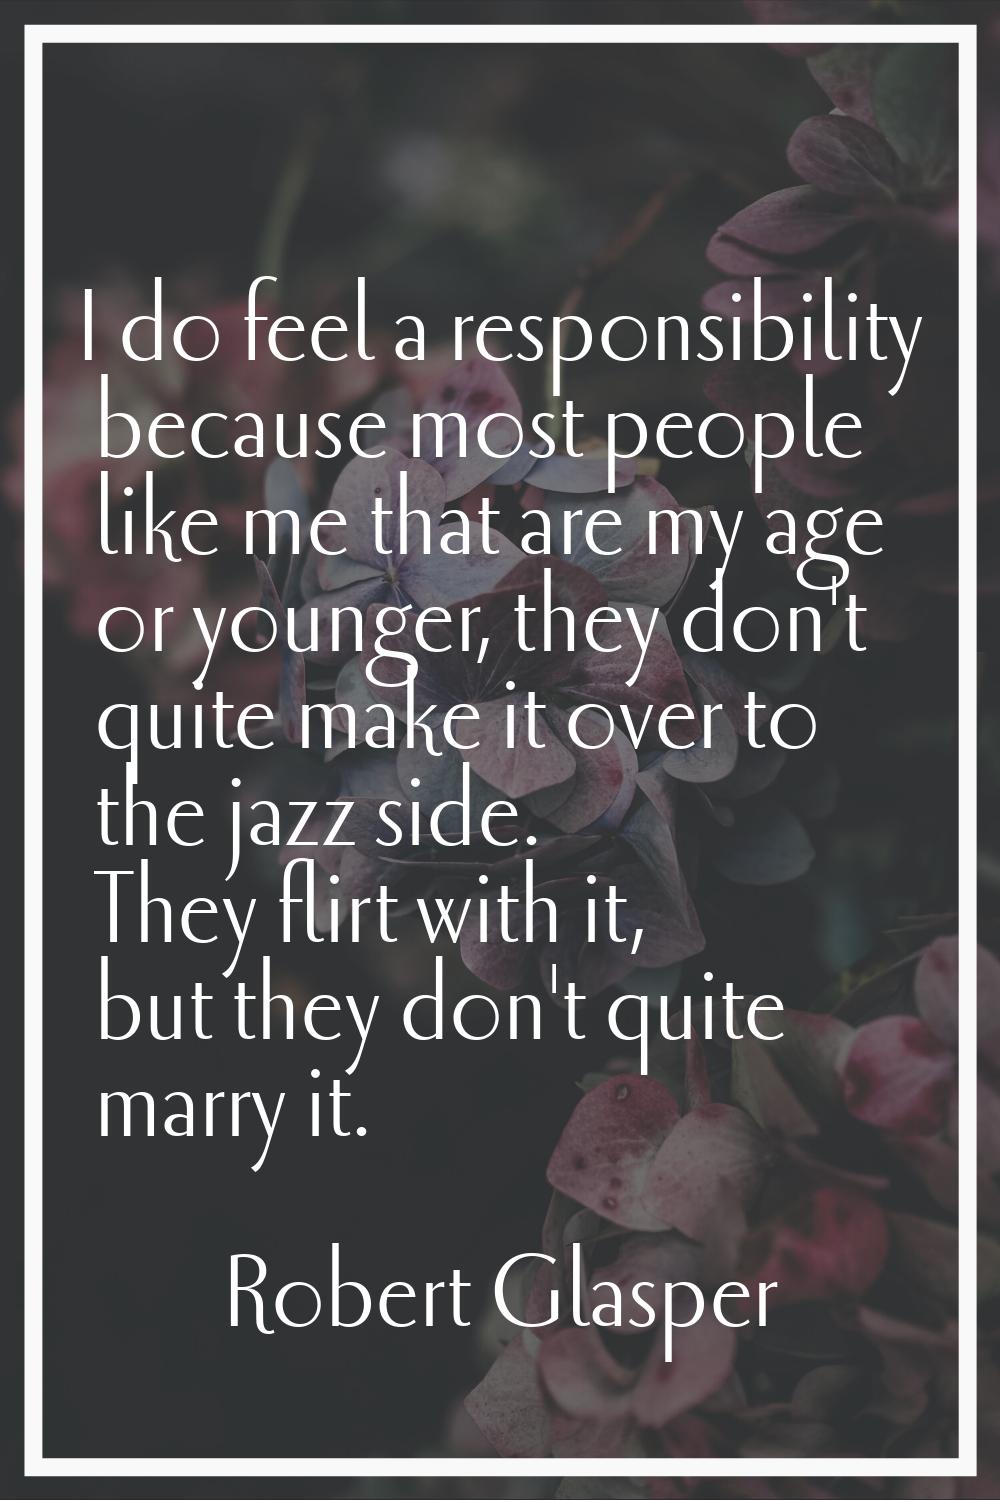 I do feel a responsibility because most people like me that are my age or younger, they don't quite